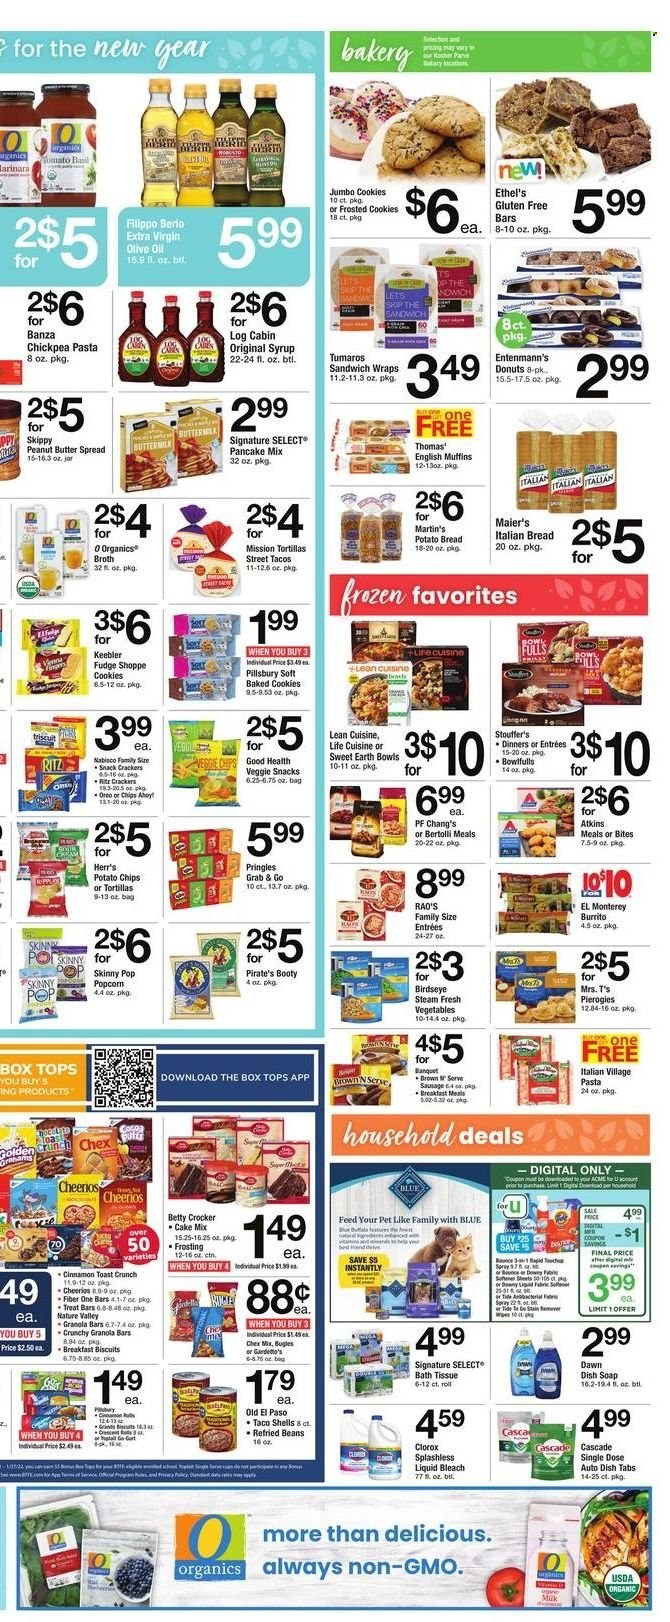 thumbnail - ACME Flyer - 01/07/2022 - 01/13/2022 - Sales products - bread, english muffins, tortillas, Old El Paso, wraps, donut, Entenmann's, cake mix, beans, pasta, pancakes, Pillsbury, Bird's Eye, burrito, Lean Cuisine, Bertolli, sausage, Stouffer's, cookies, fudge, snack, crackers, biscuit, Keebler, RITZ, potato chips, Pringles, Skinny Pop, Chex Mix, cocoa, frosting, broth, refried beans, Cheerios, granola bar, Nature Valley, Fiber One, cinnamon, extra virgin olive oil, olive oil, oil, peanut butter, syrup, bath tissue, bleach, Clorox, Cascade, Tide, Bounce, soap, Anew, bowl, tops. Page 3.